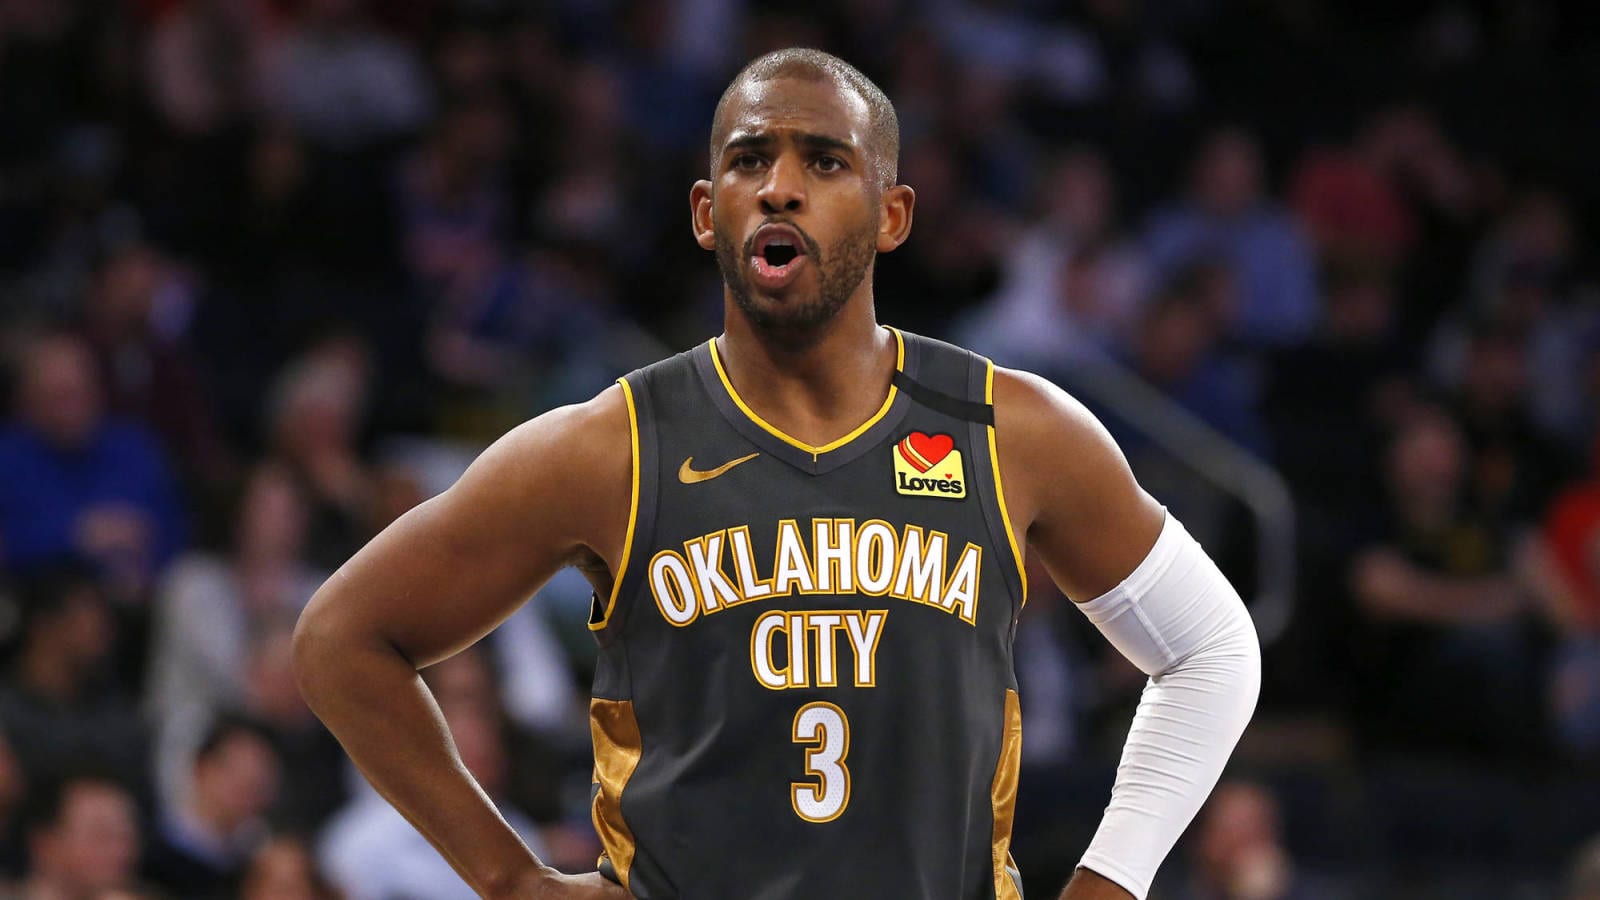 Chris Paul On The Move As Free Agency Begins